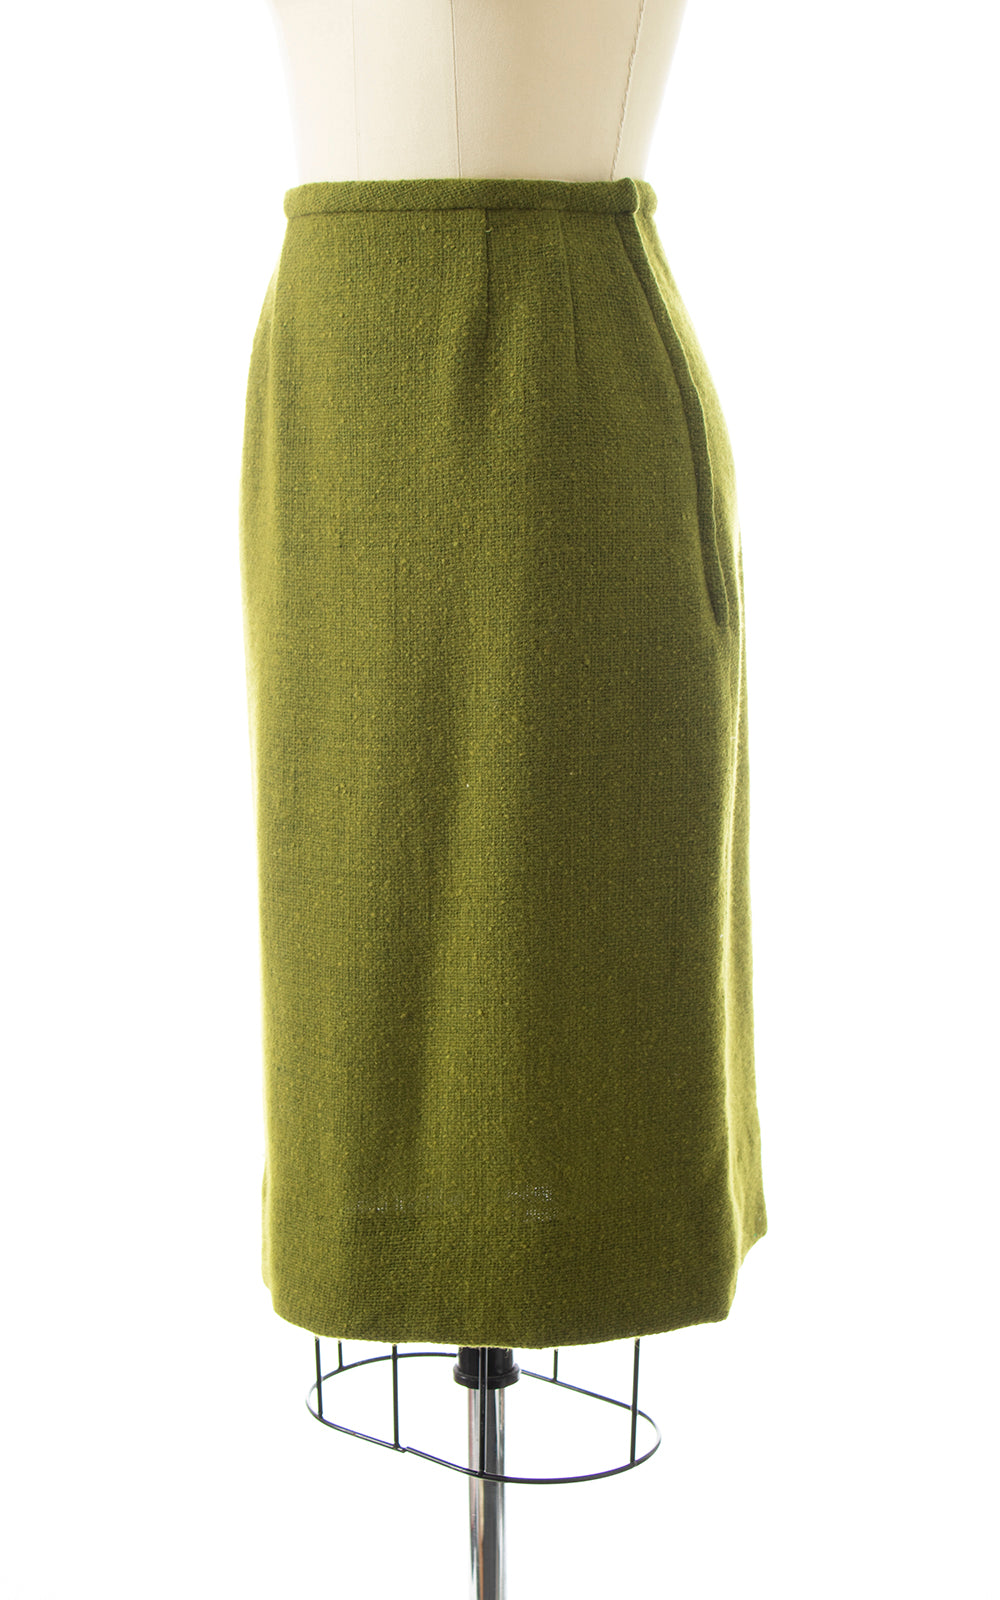 BLV x DEANNA || 1960s Olive Green Wool Pencil Skirt | x-small/small